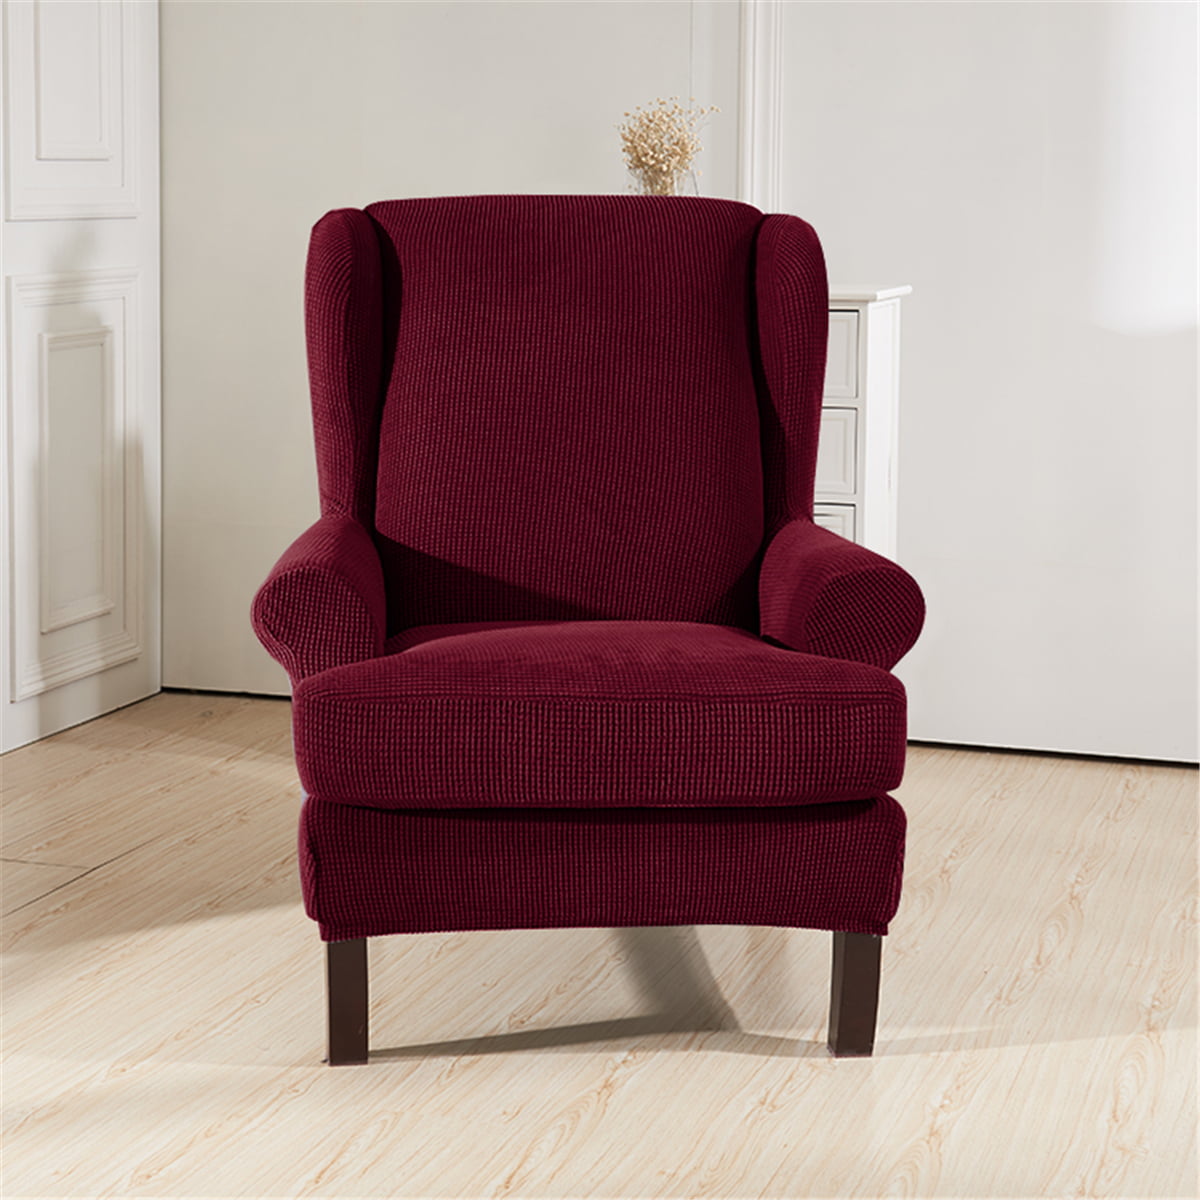 Fabric Elastic Armchair Wingback Wing Chair Slipcovers Home Furniture Protector 